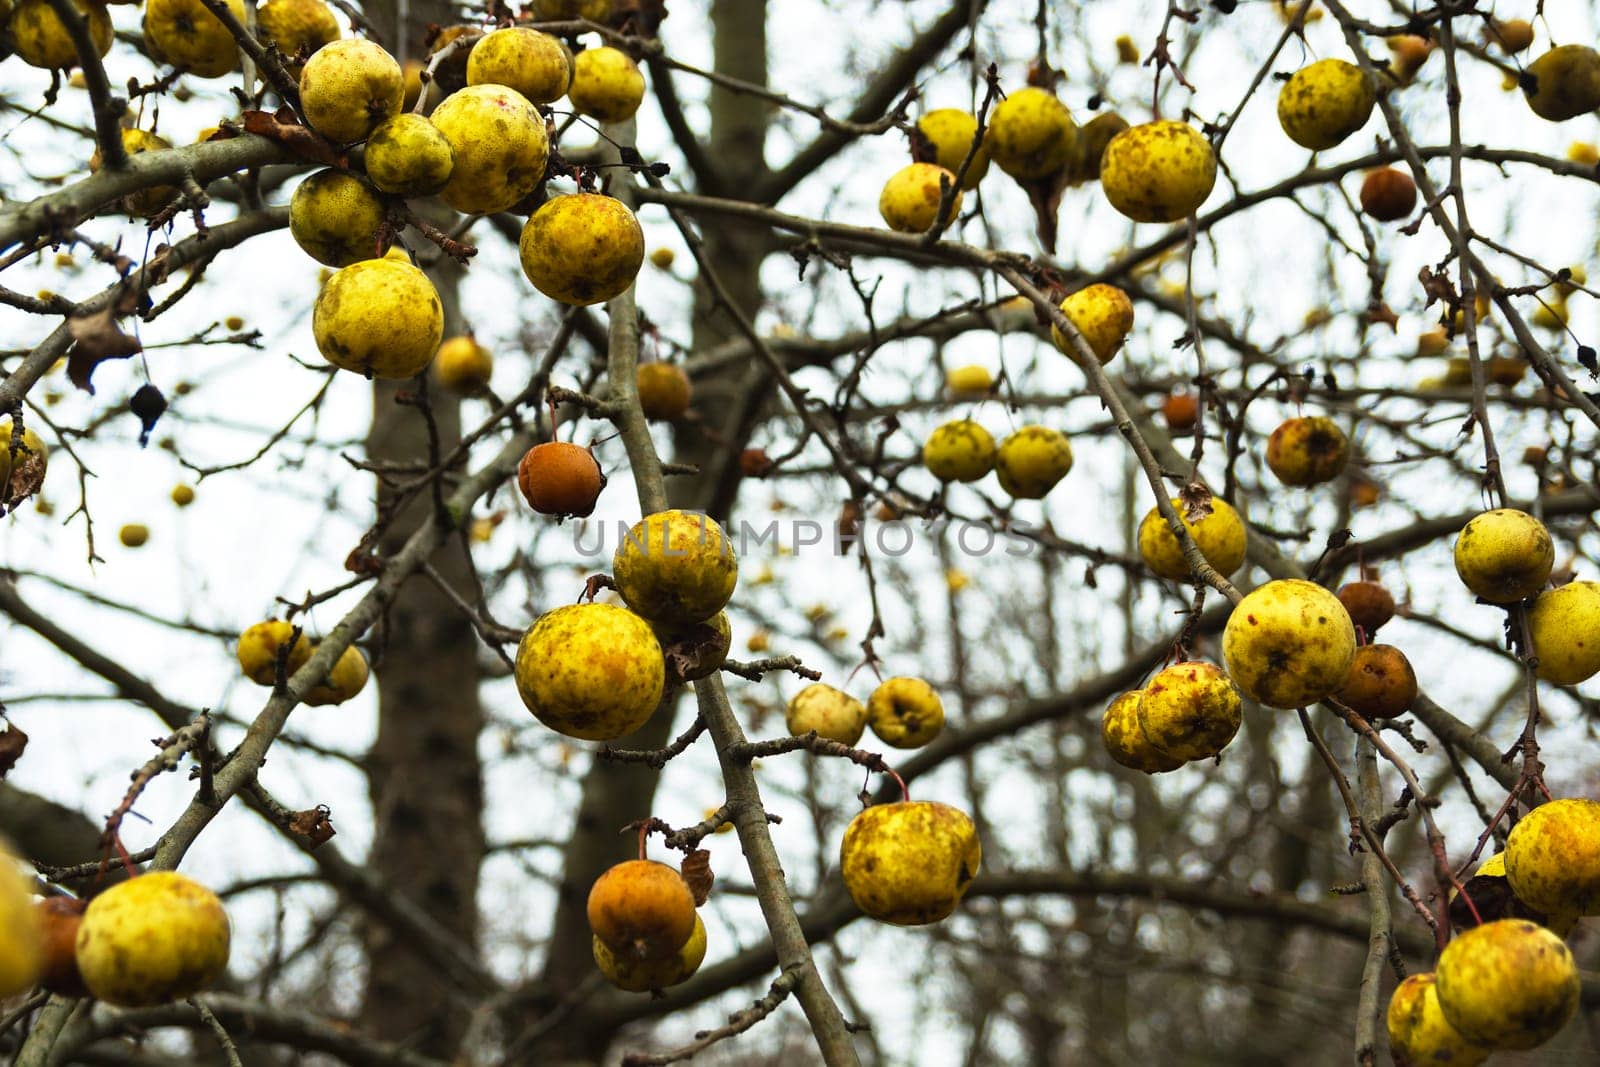 Lots of yellow apples on the tree without leaves, autumn day